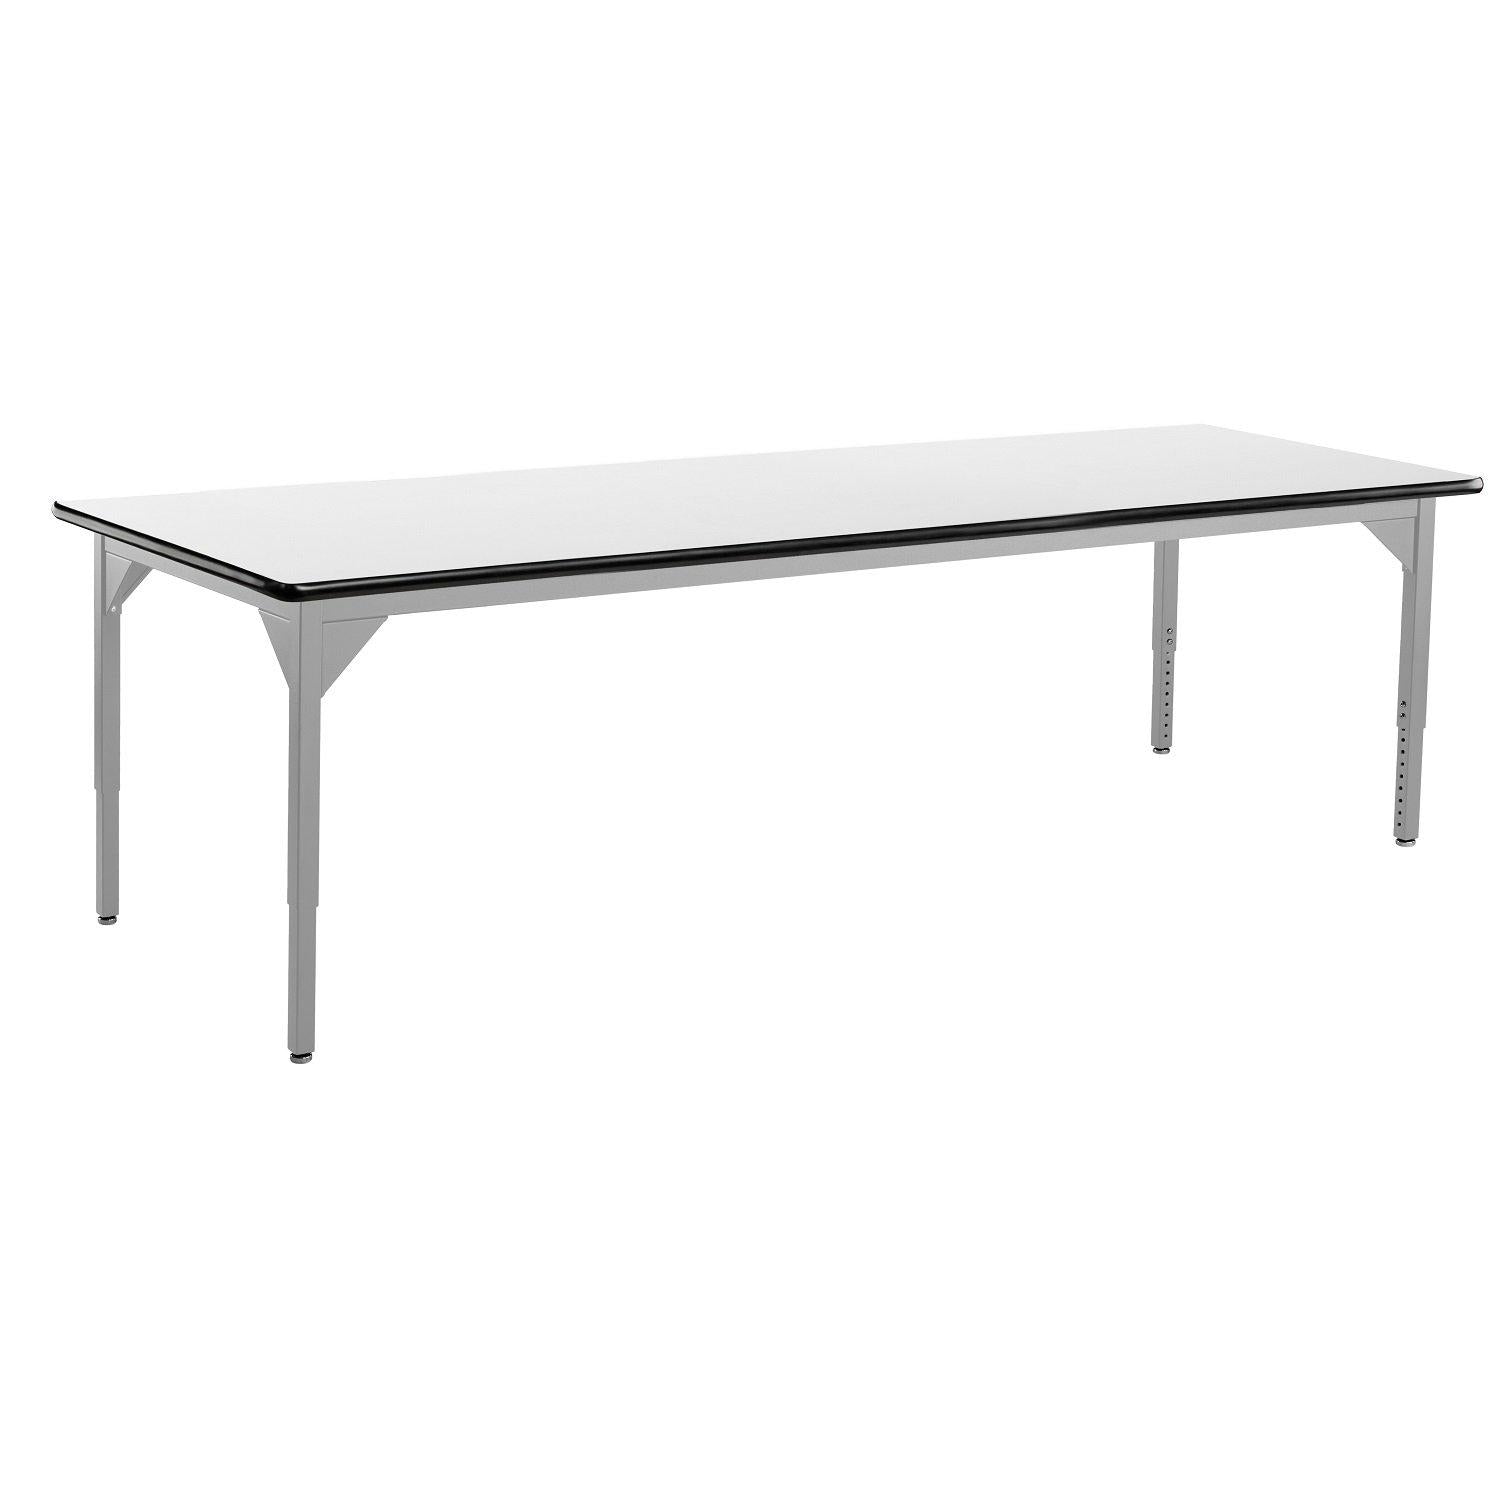 Heavy-Duty Height-Adjustable Utility Table, Soft Grey Frame, 48" x 96", Whiteboard High-Pressure Laminate Top